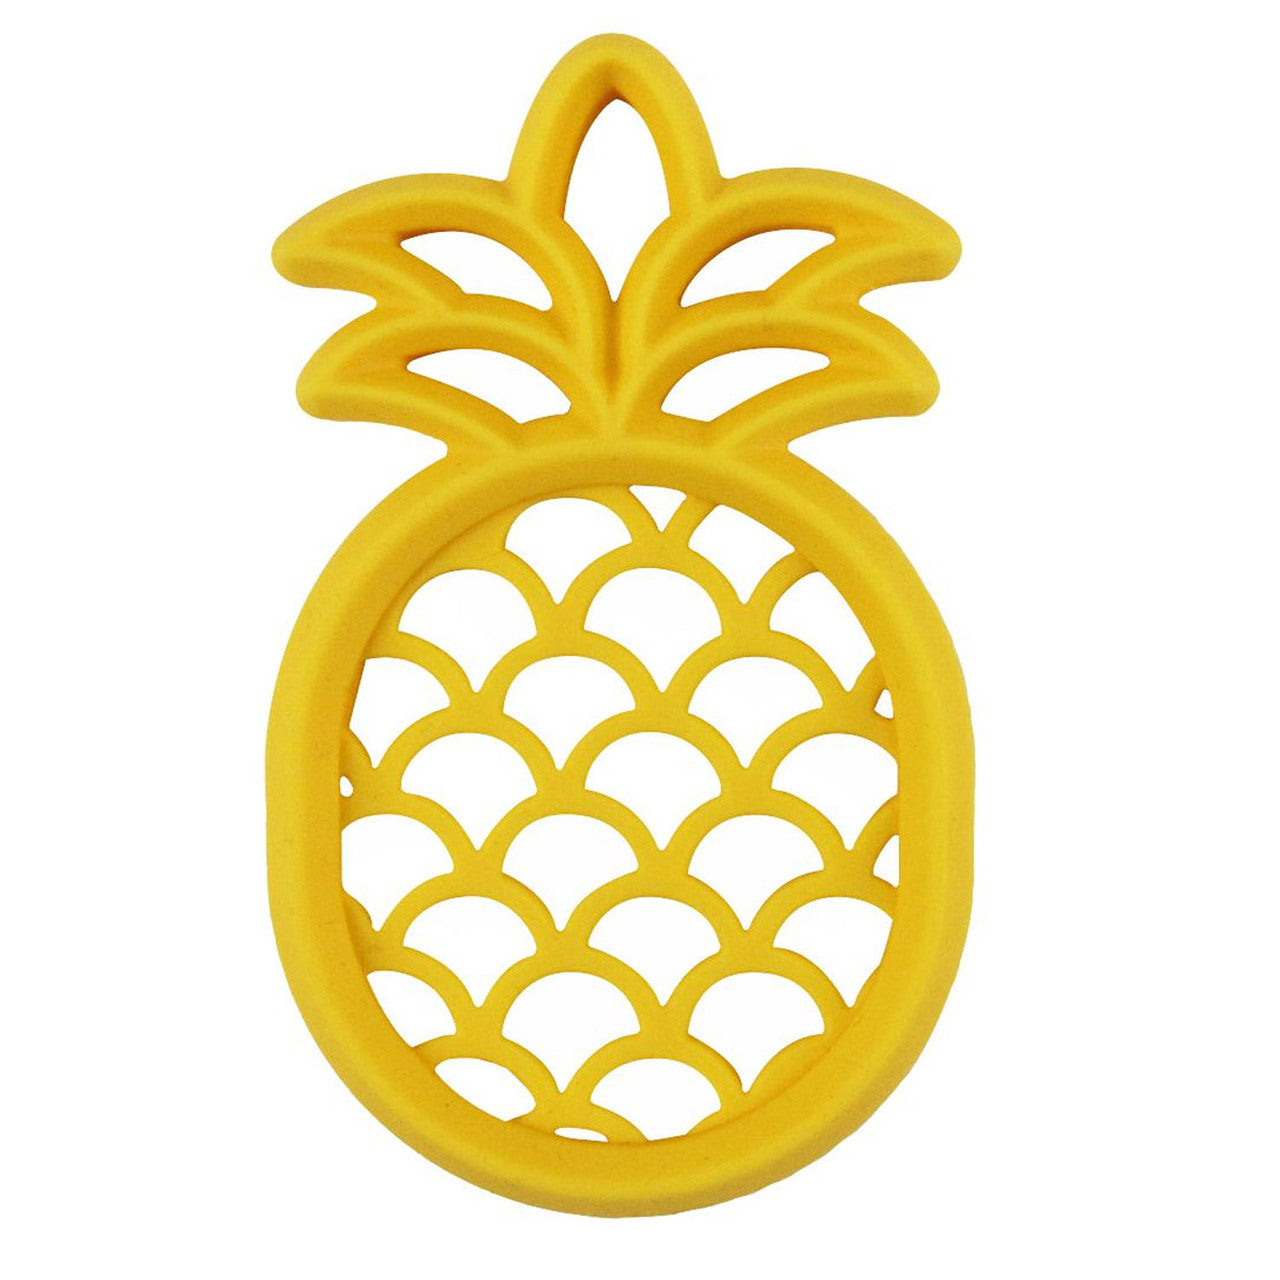 SpearmintLOVE’s baby Silicone Baby Teether, Pineapple